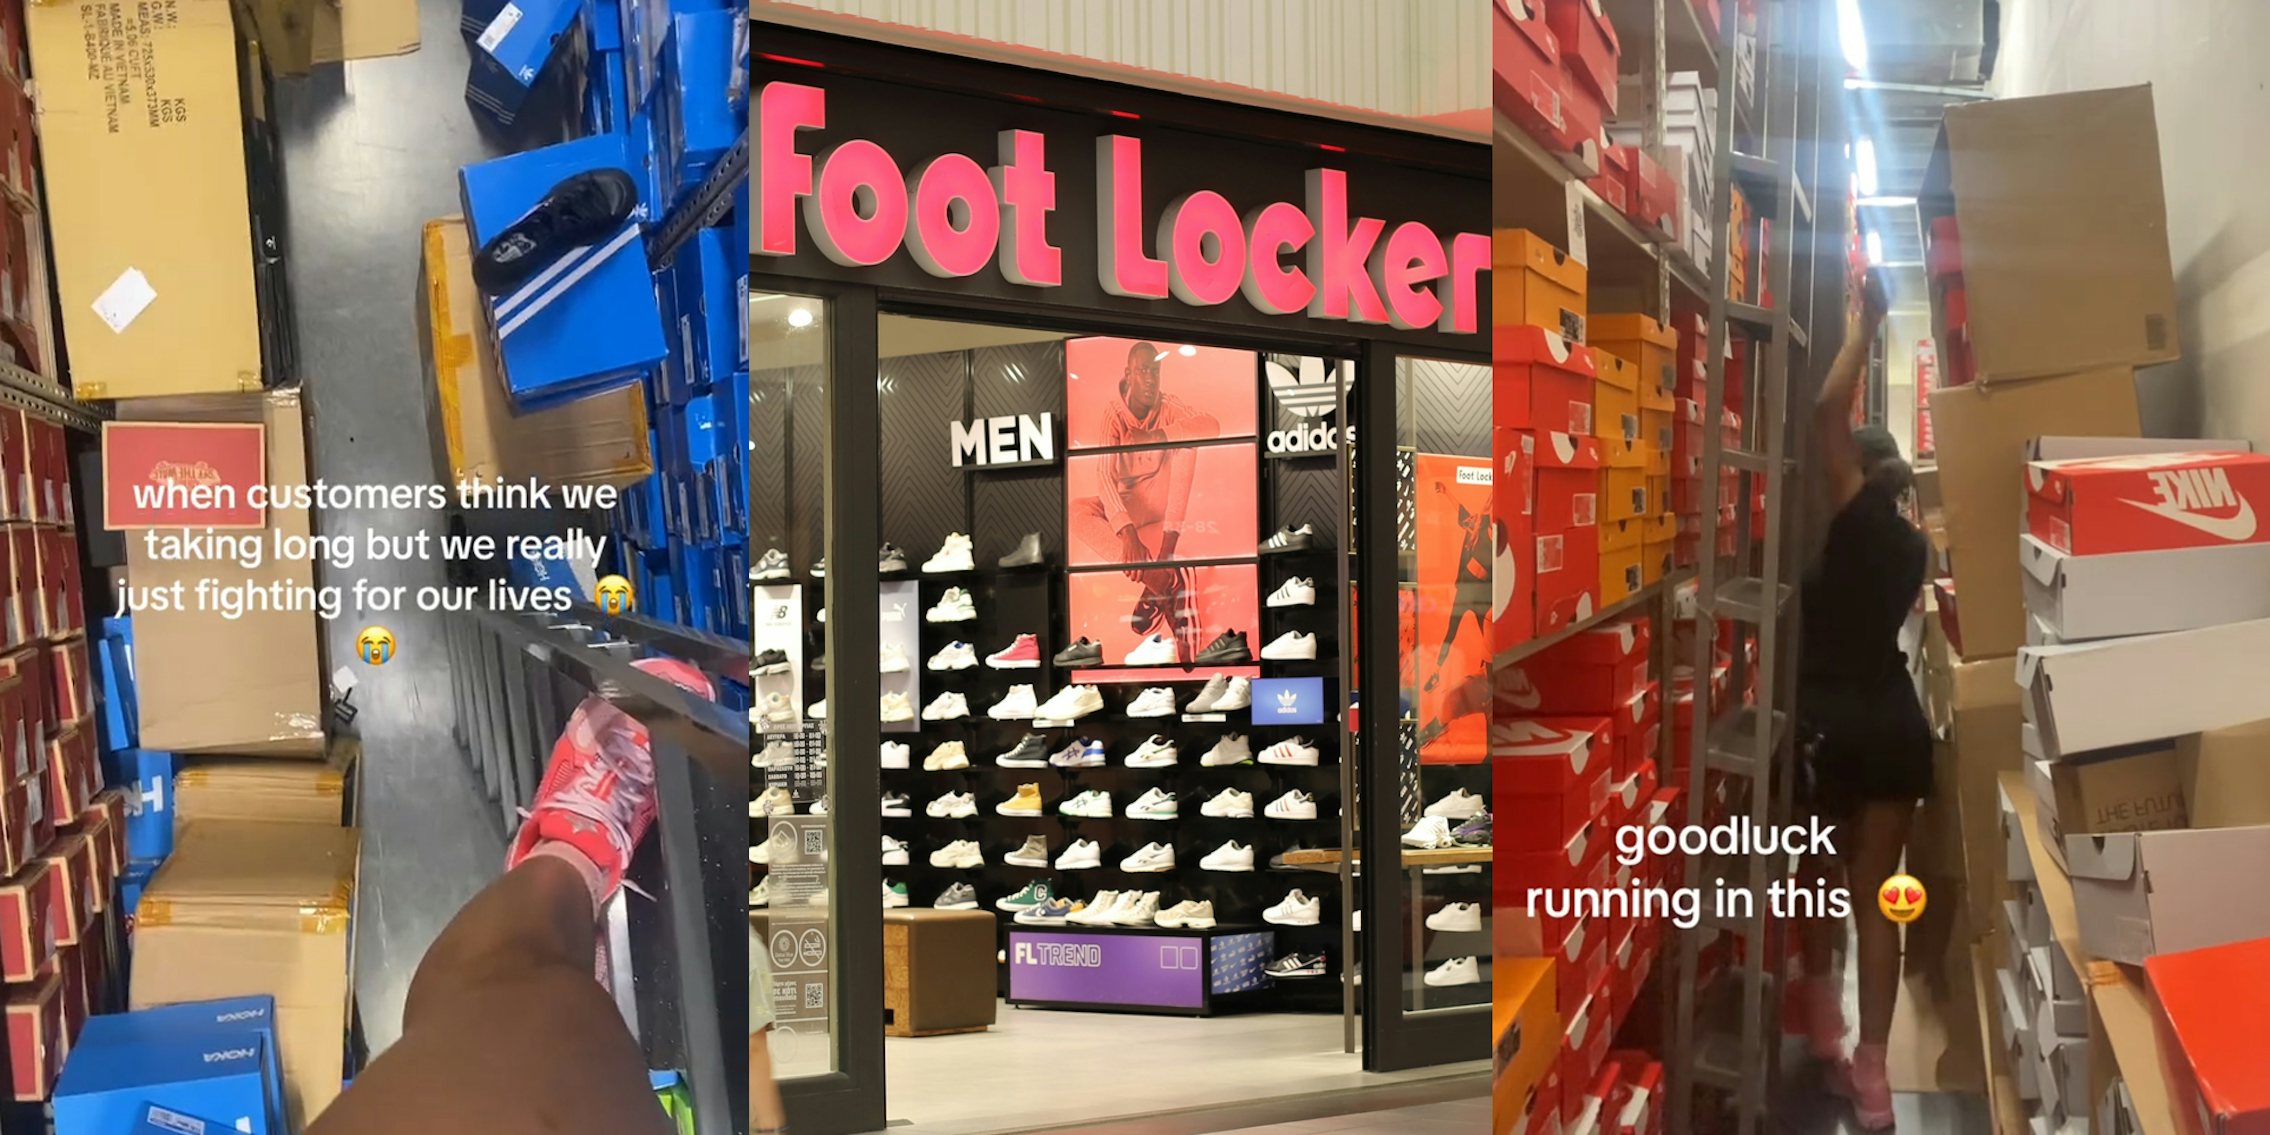 Foot Locker employee on ladder with caption 'when customers think we taking long but we really just fighting for our lives' (l) Foot Locker store entrance with sign (c) Foot Locker employee walking with caption 'goodluck running in this' (r)